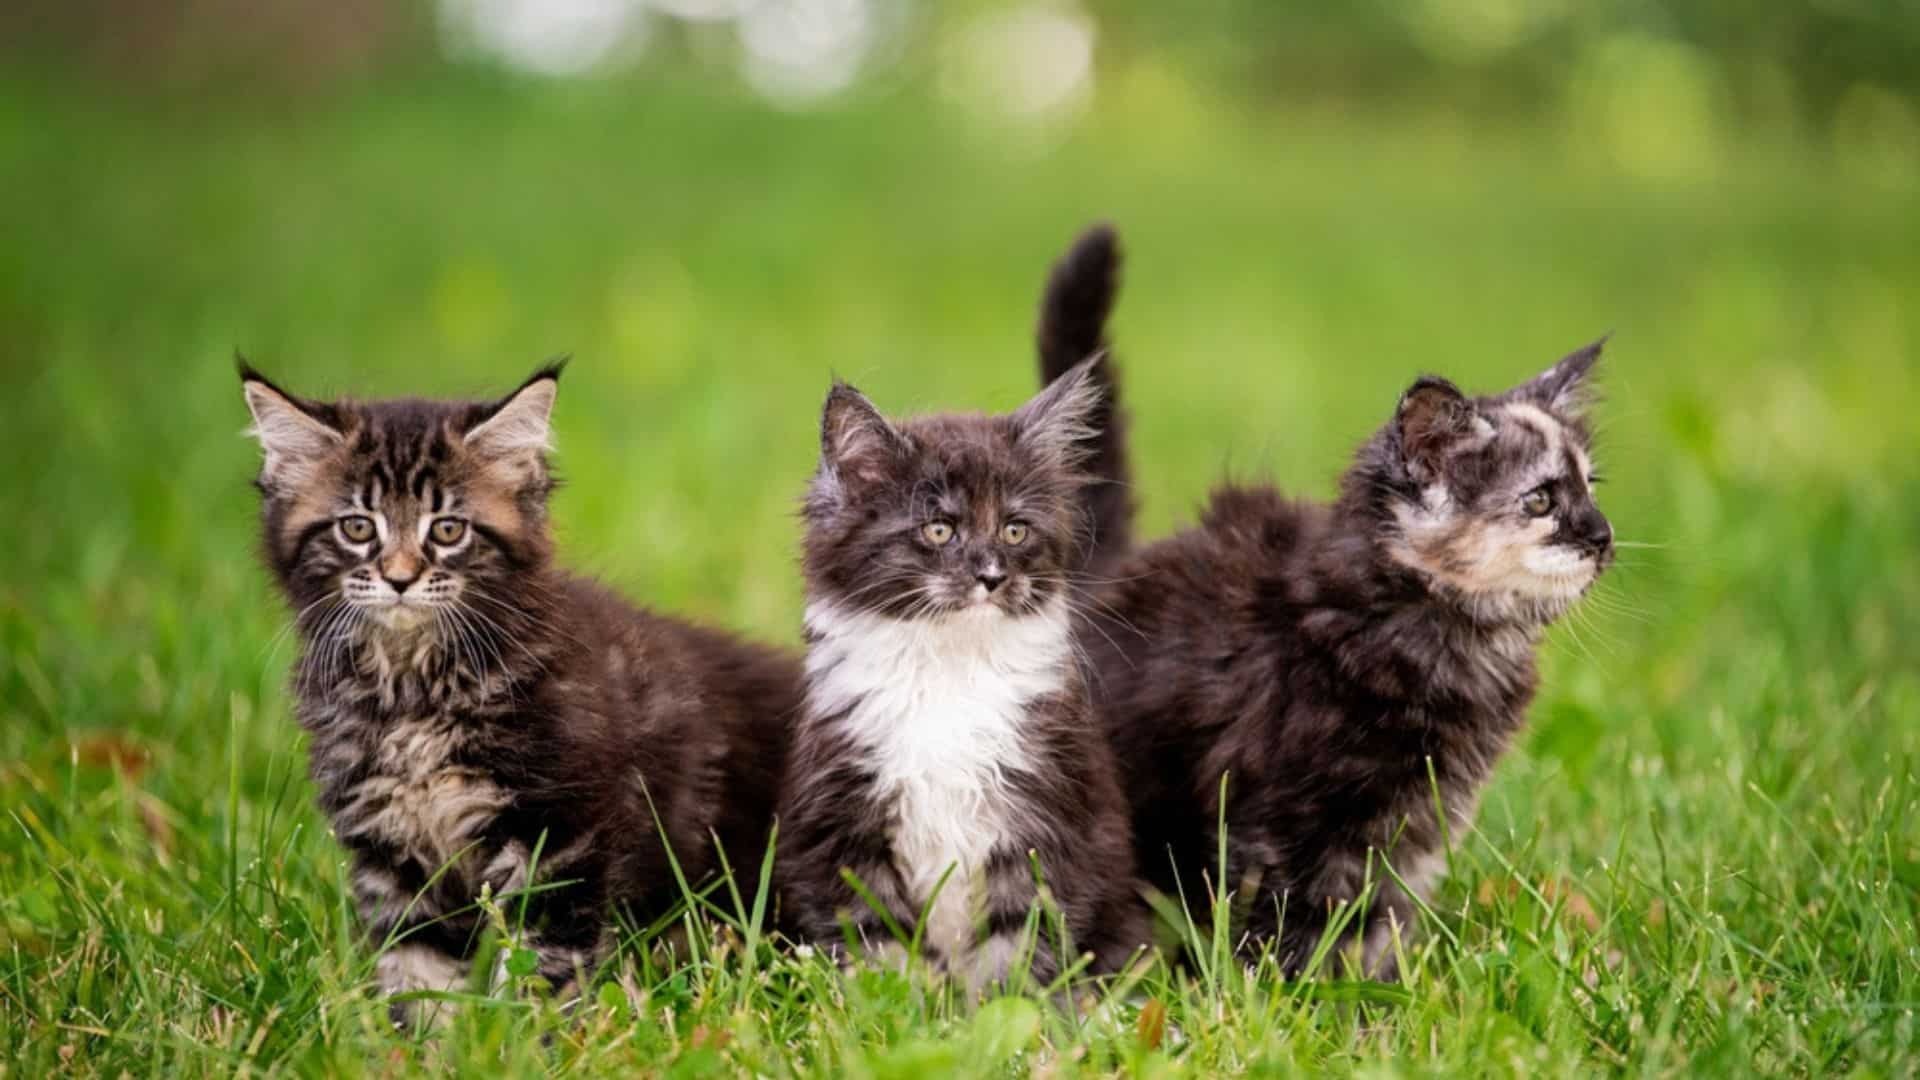 group of three fluffy Maine Coon kittens walks on the green grass.